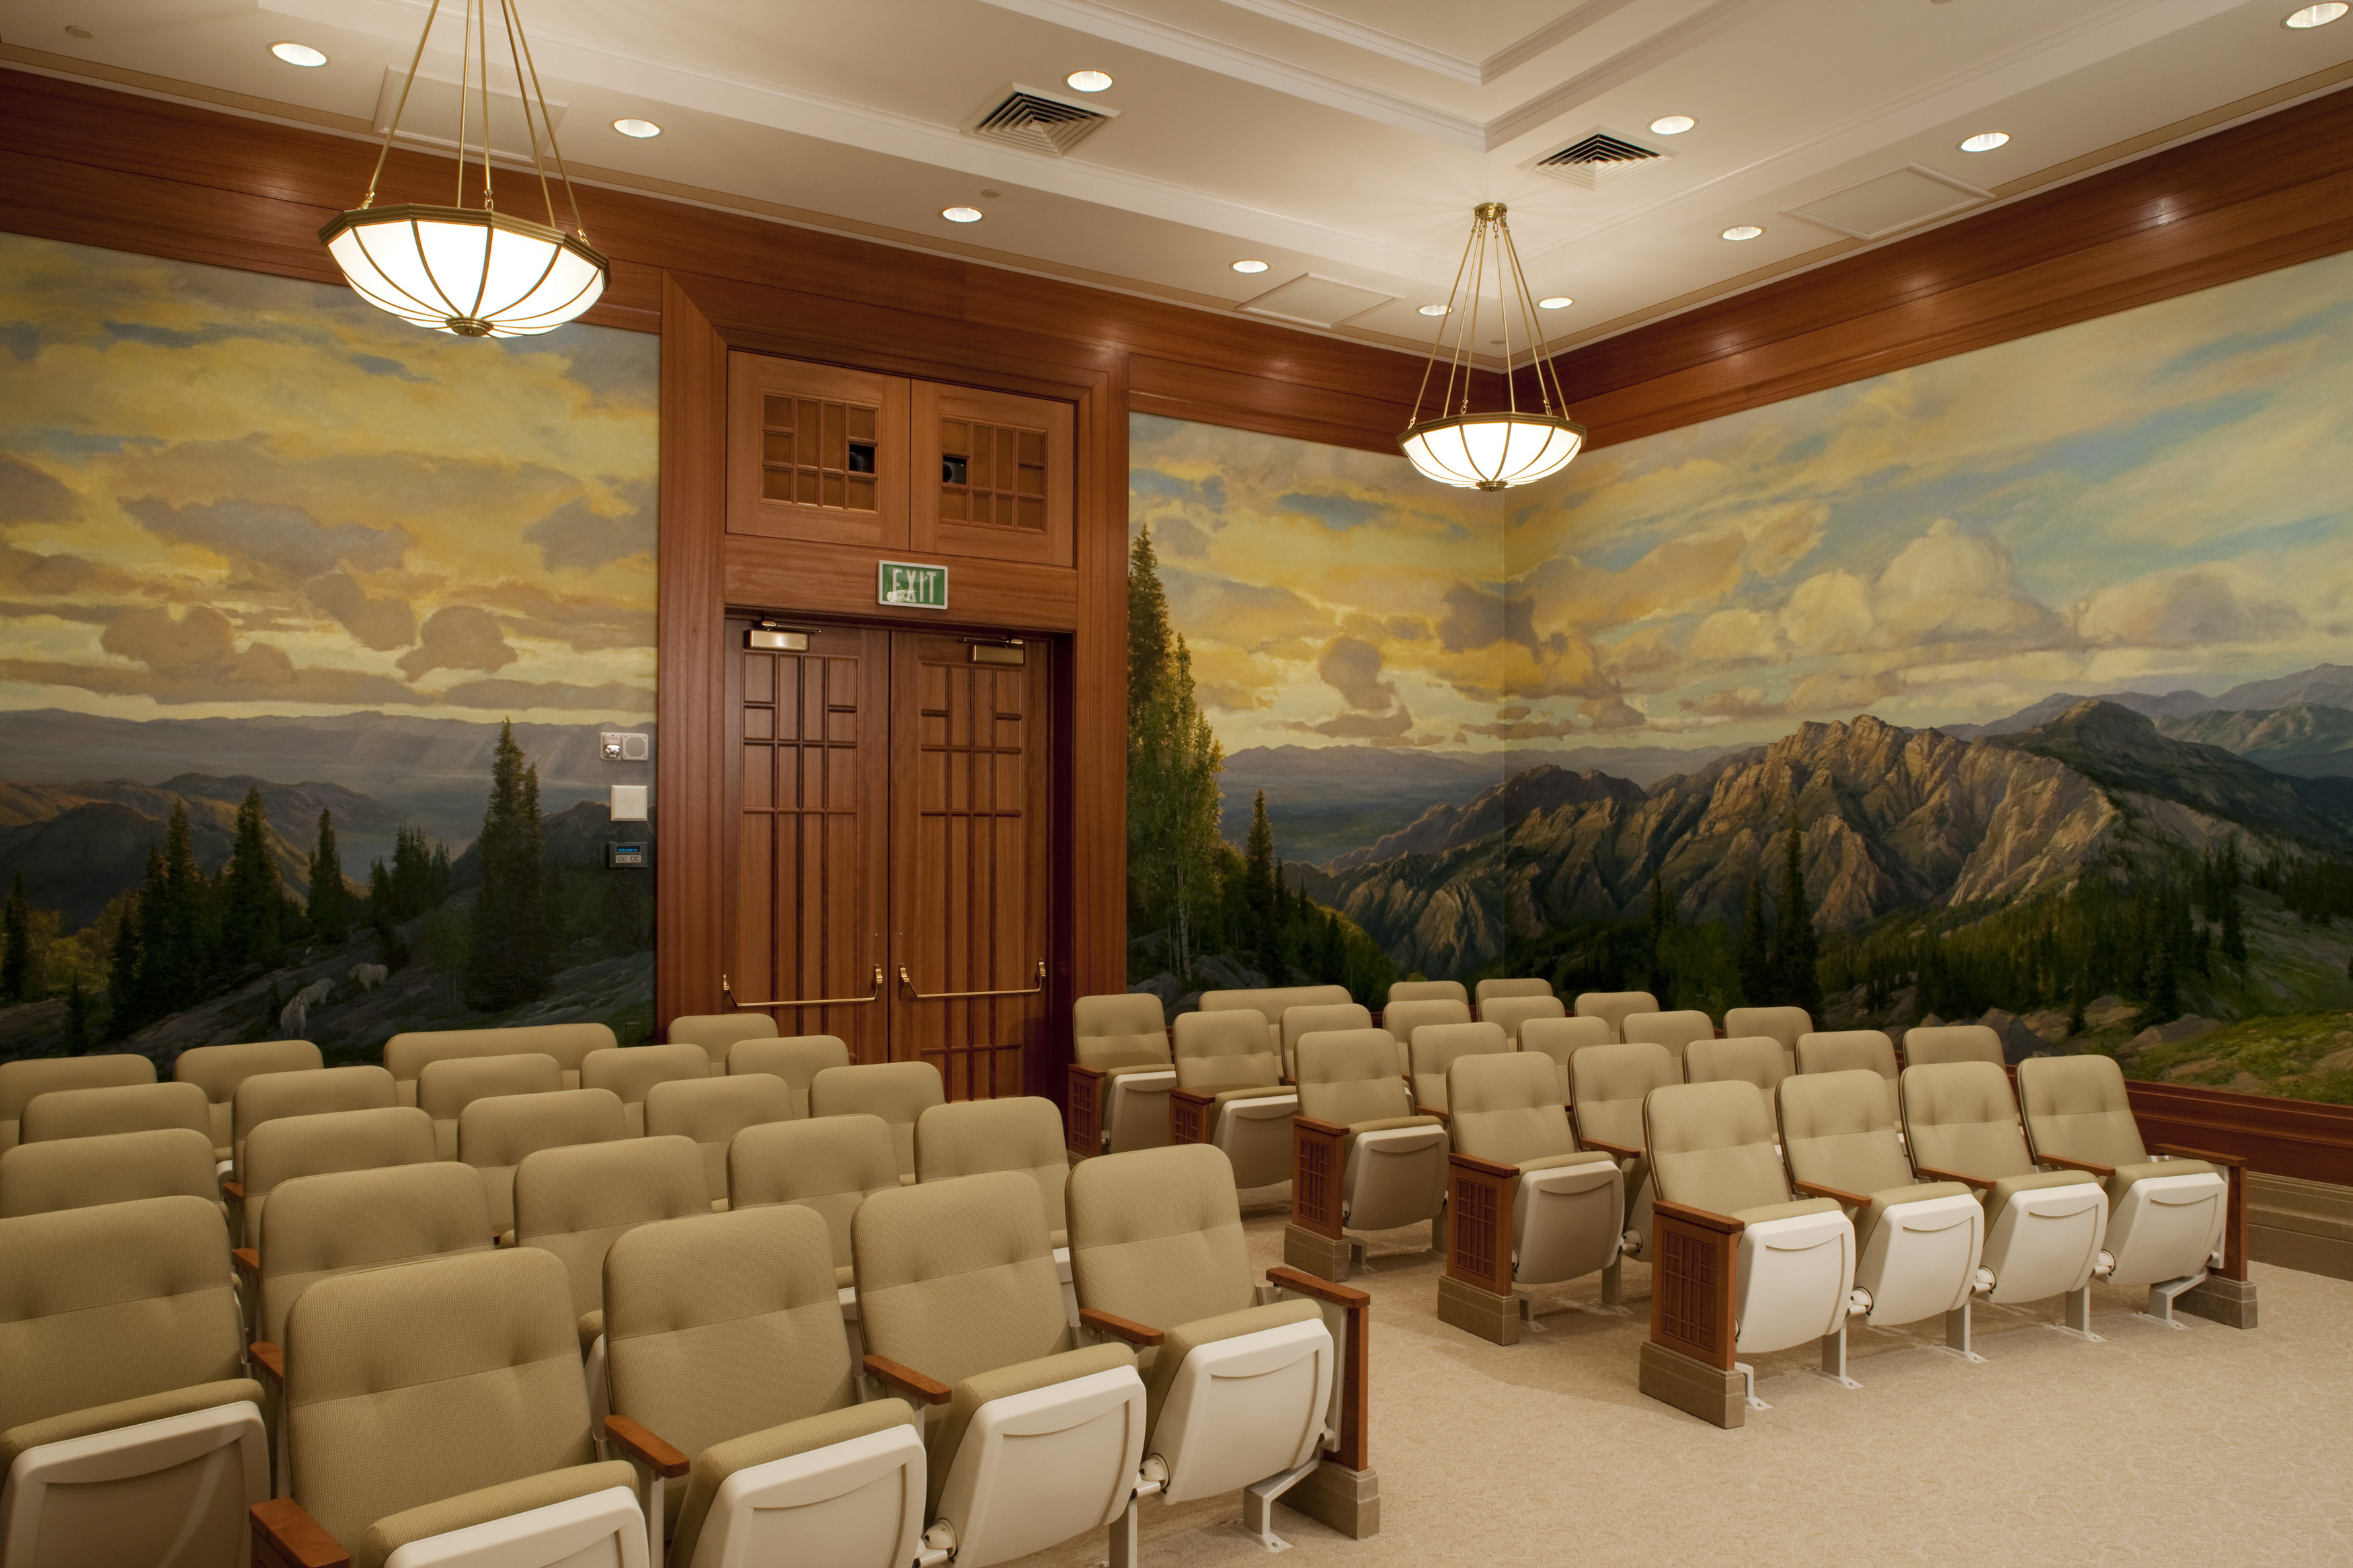 A room full of gray seats, with a mural of mountains along the walls.